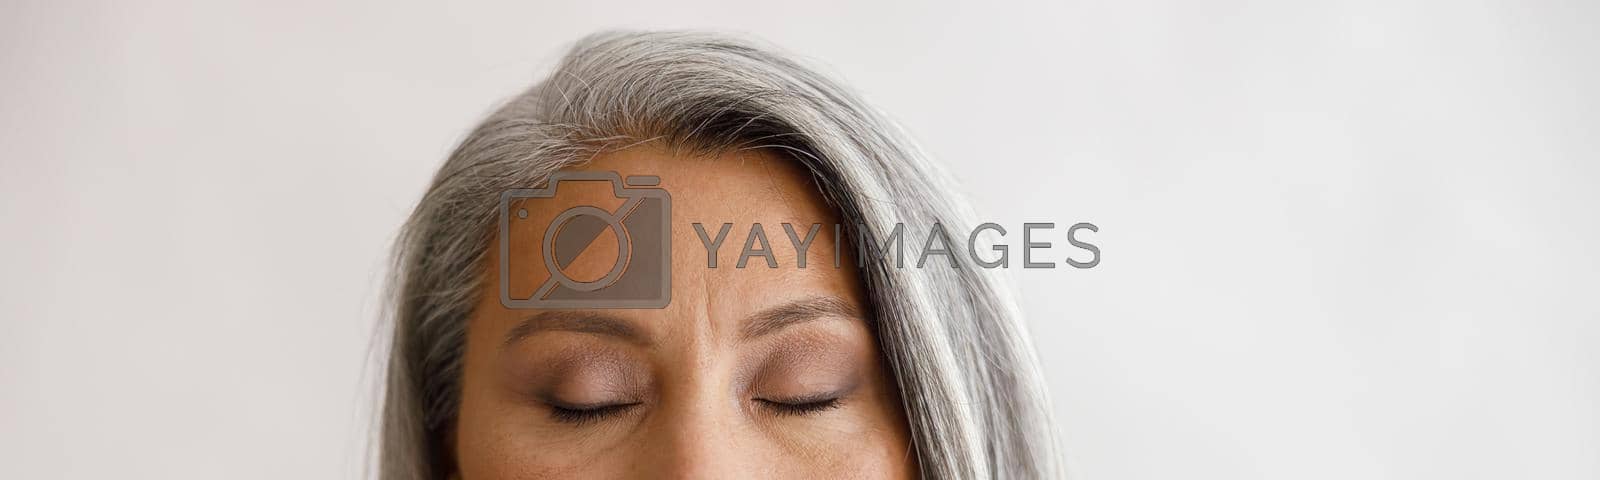 Royalty free image of Tranquil grey haired lady with closed eyes and elegant makeup poses on light background by Yaroslav_astakhov